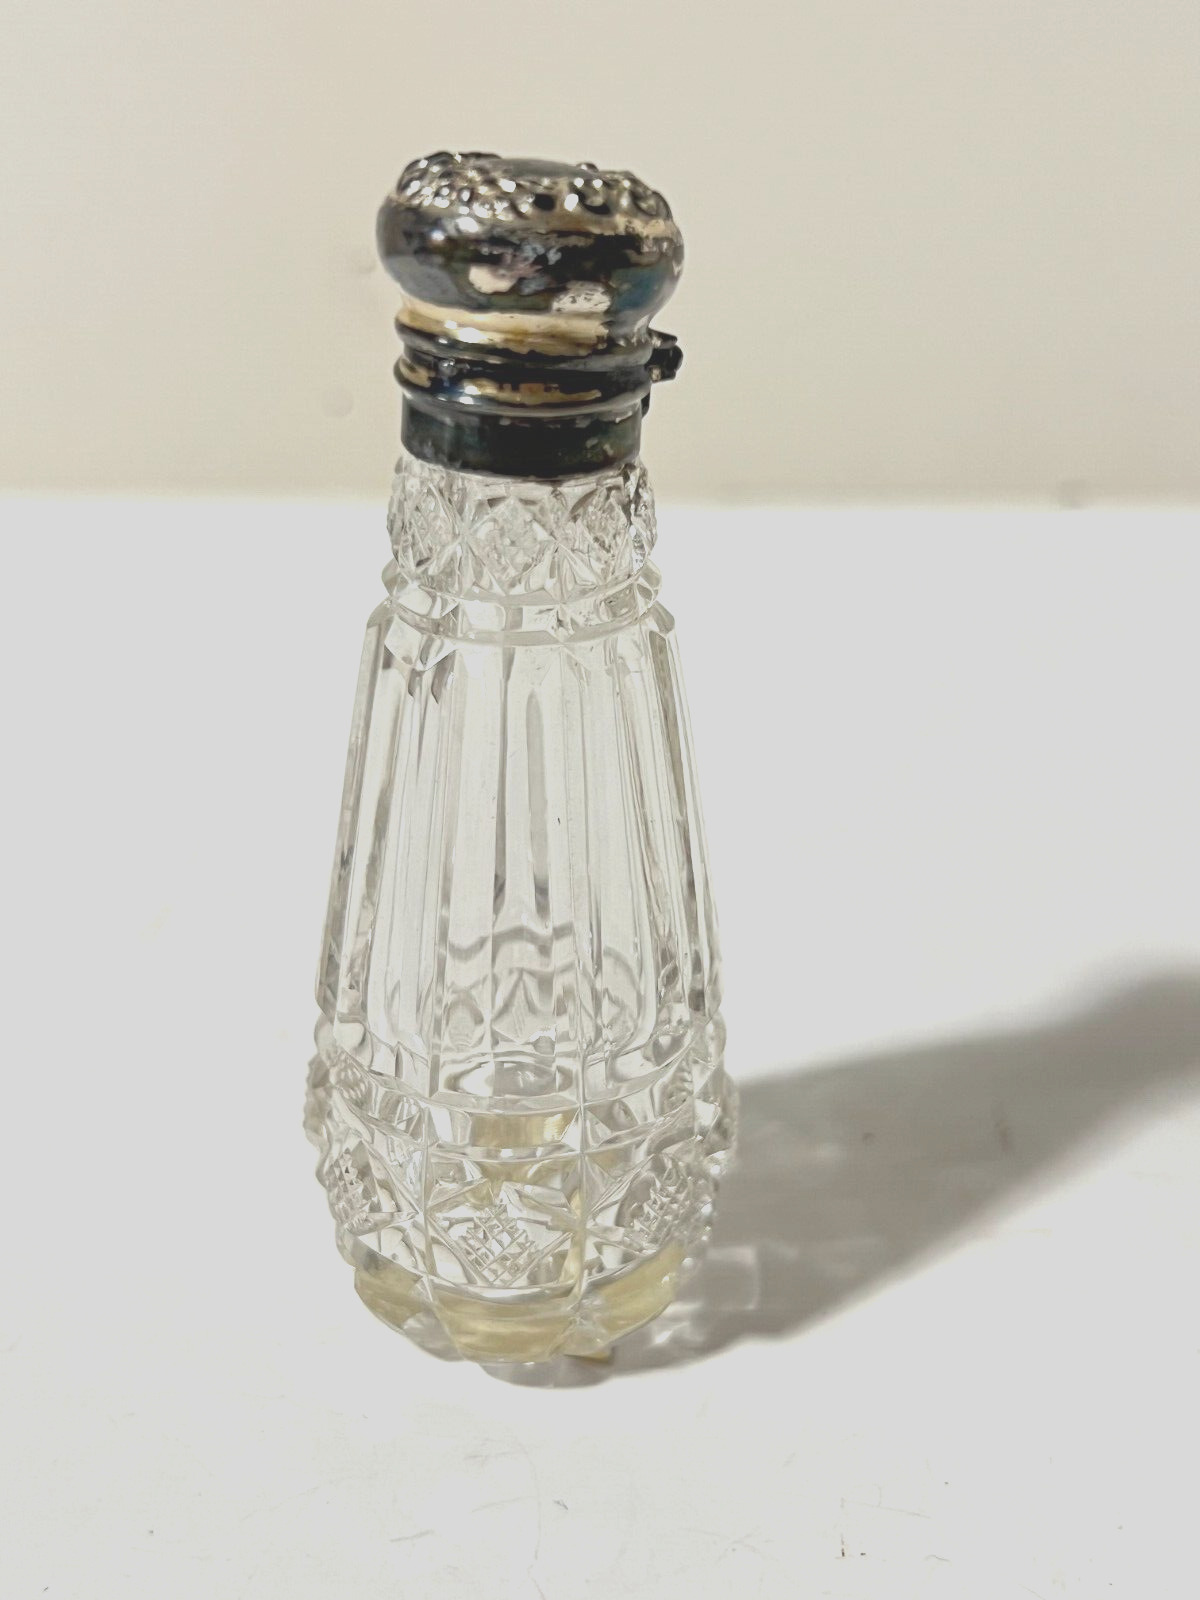 ANTIQUE VICTORIAN CUT GLASS STERLING SILVER TOP PERFUME BOTTLE